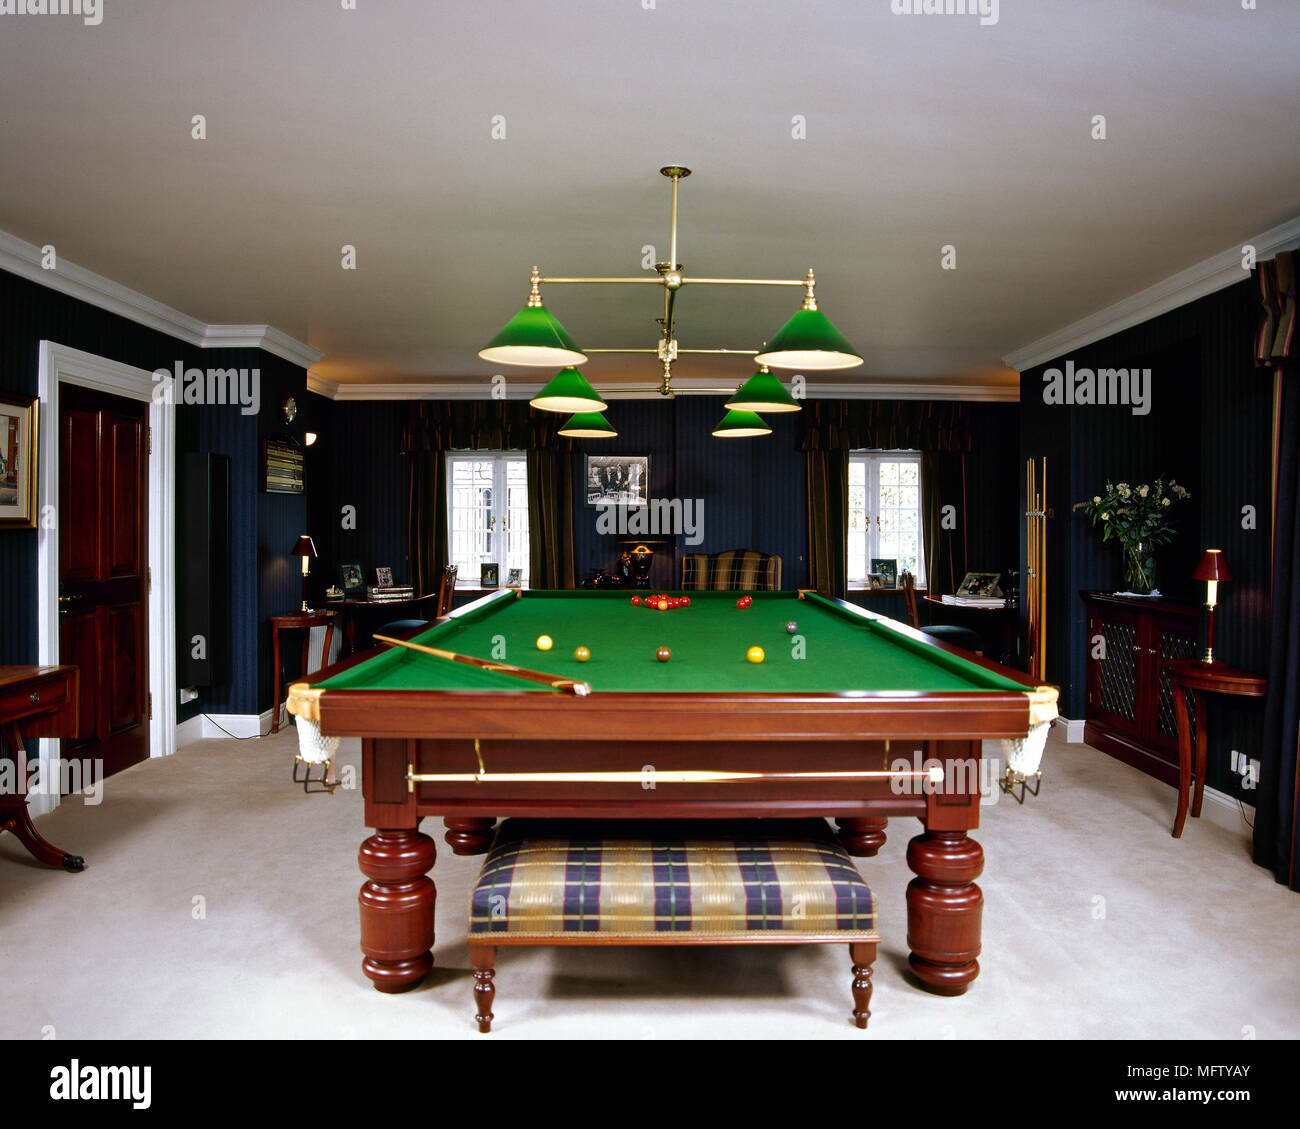 A traditional games room with snooker table, Stock Photo